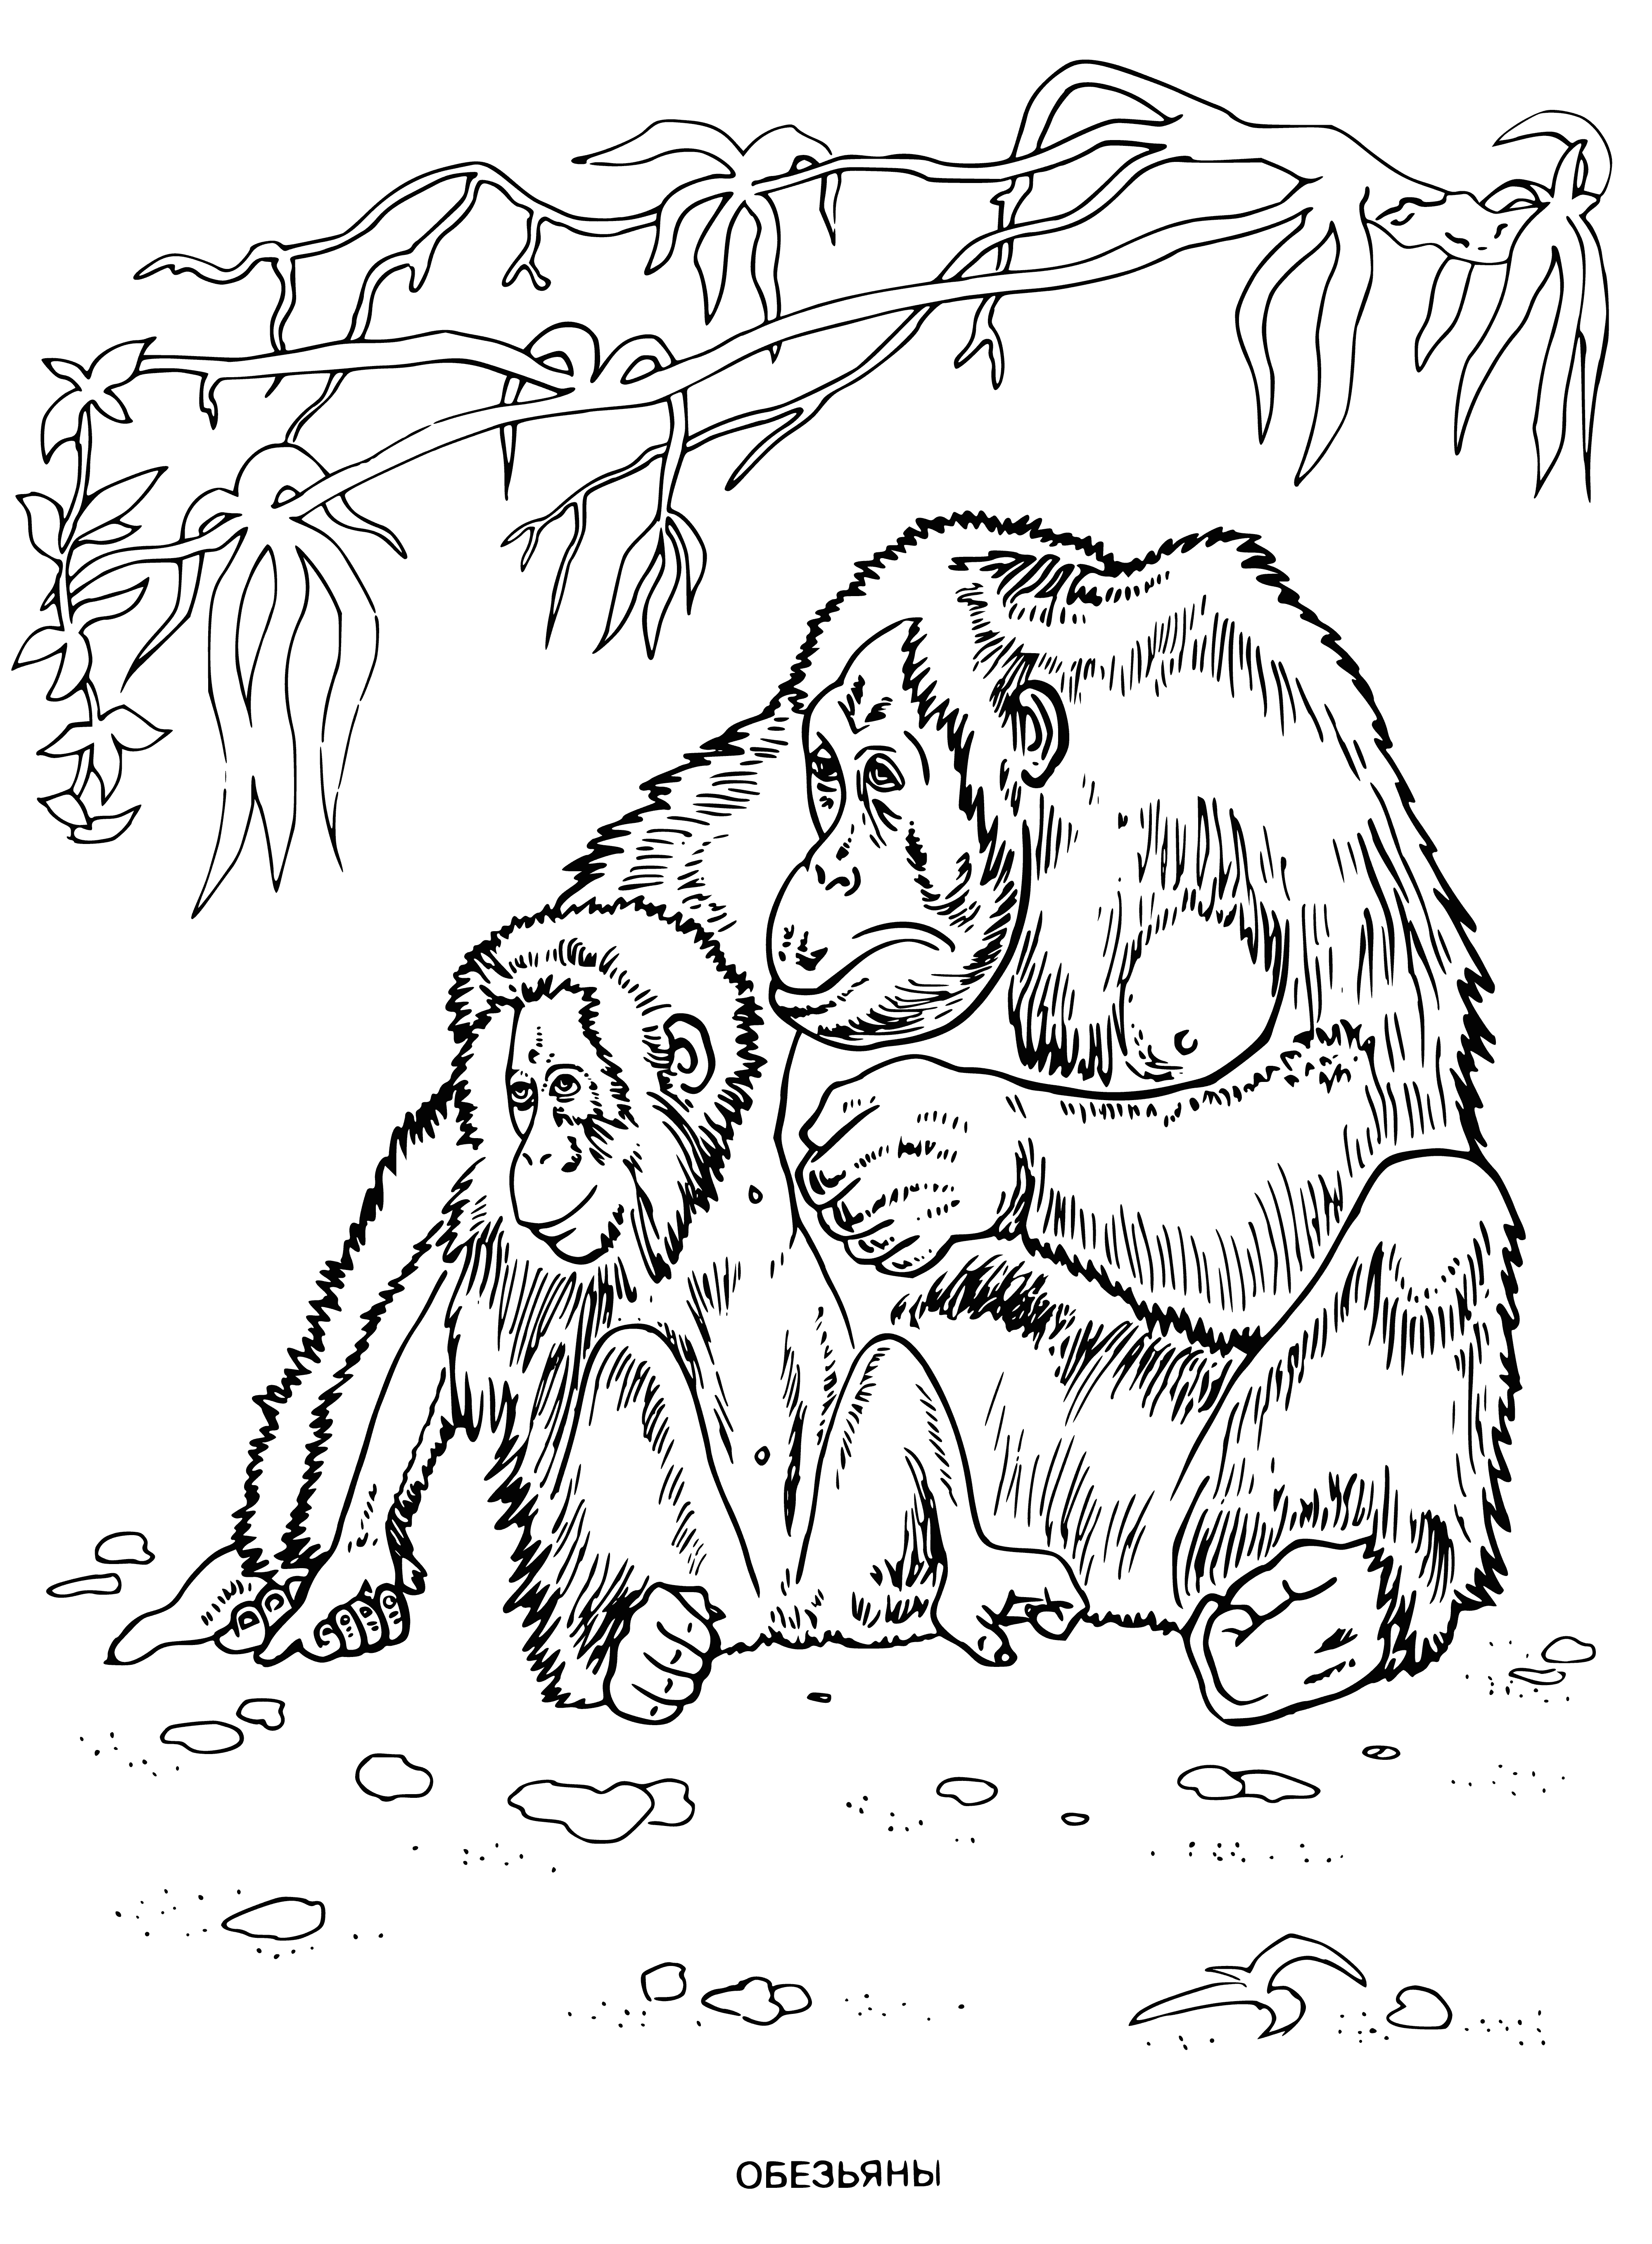 coloring page: Two small, brown monkeys sitting on a tree branch with big ears and long tails. #coloringpage